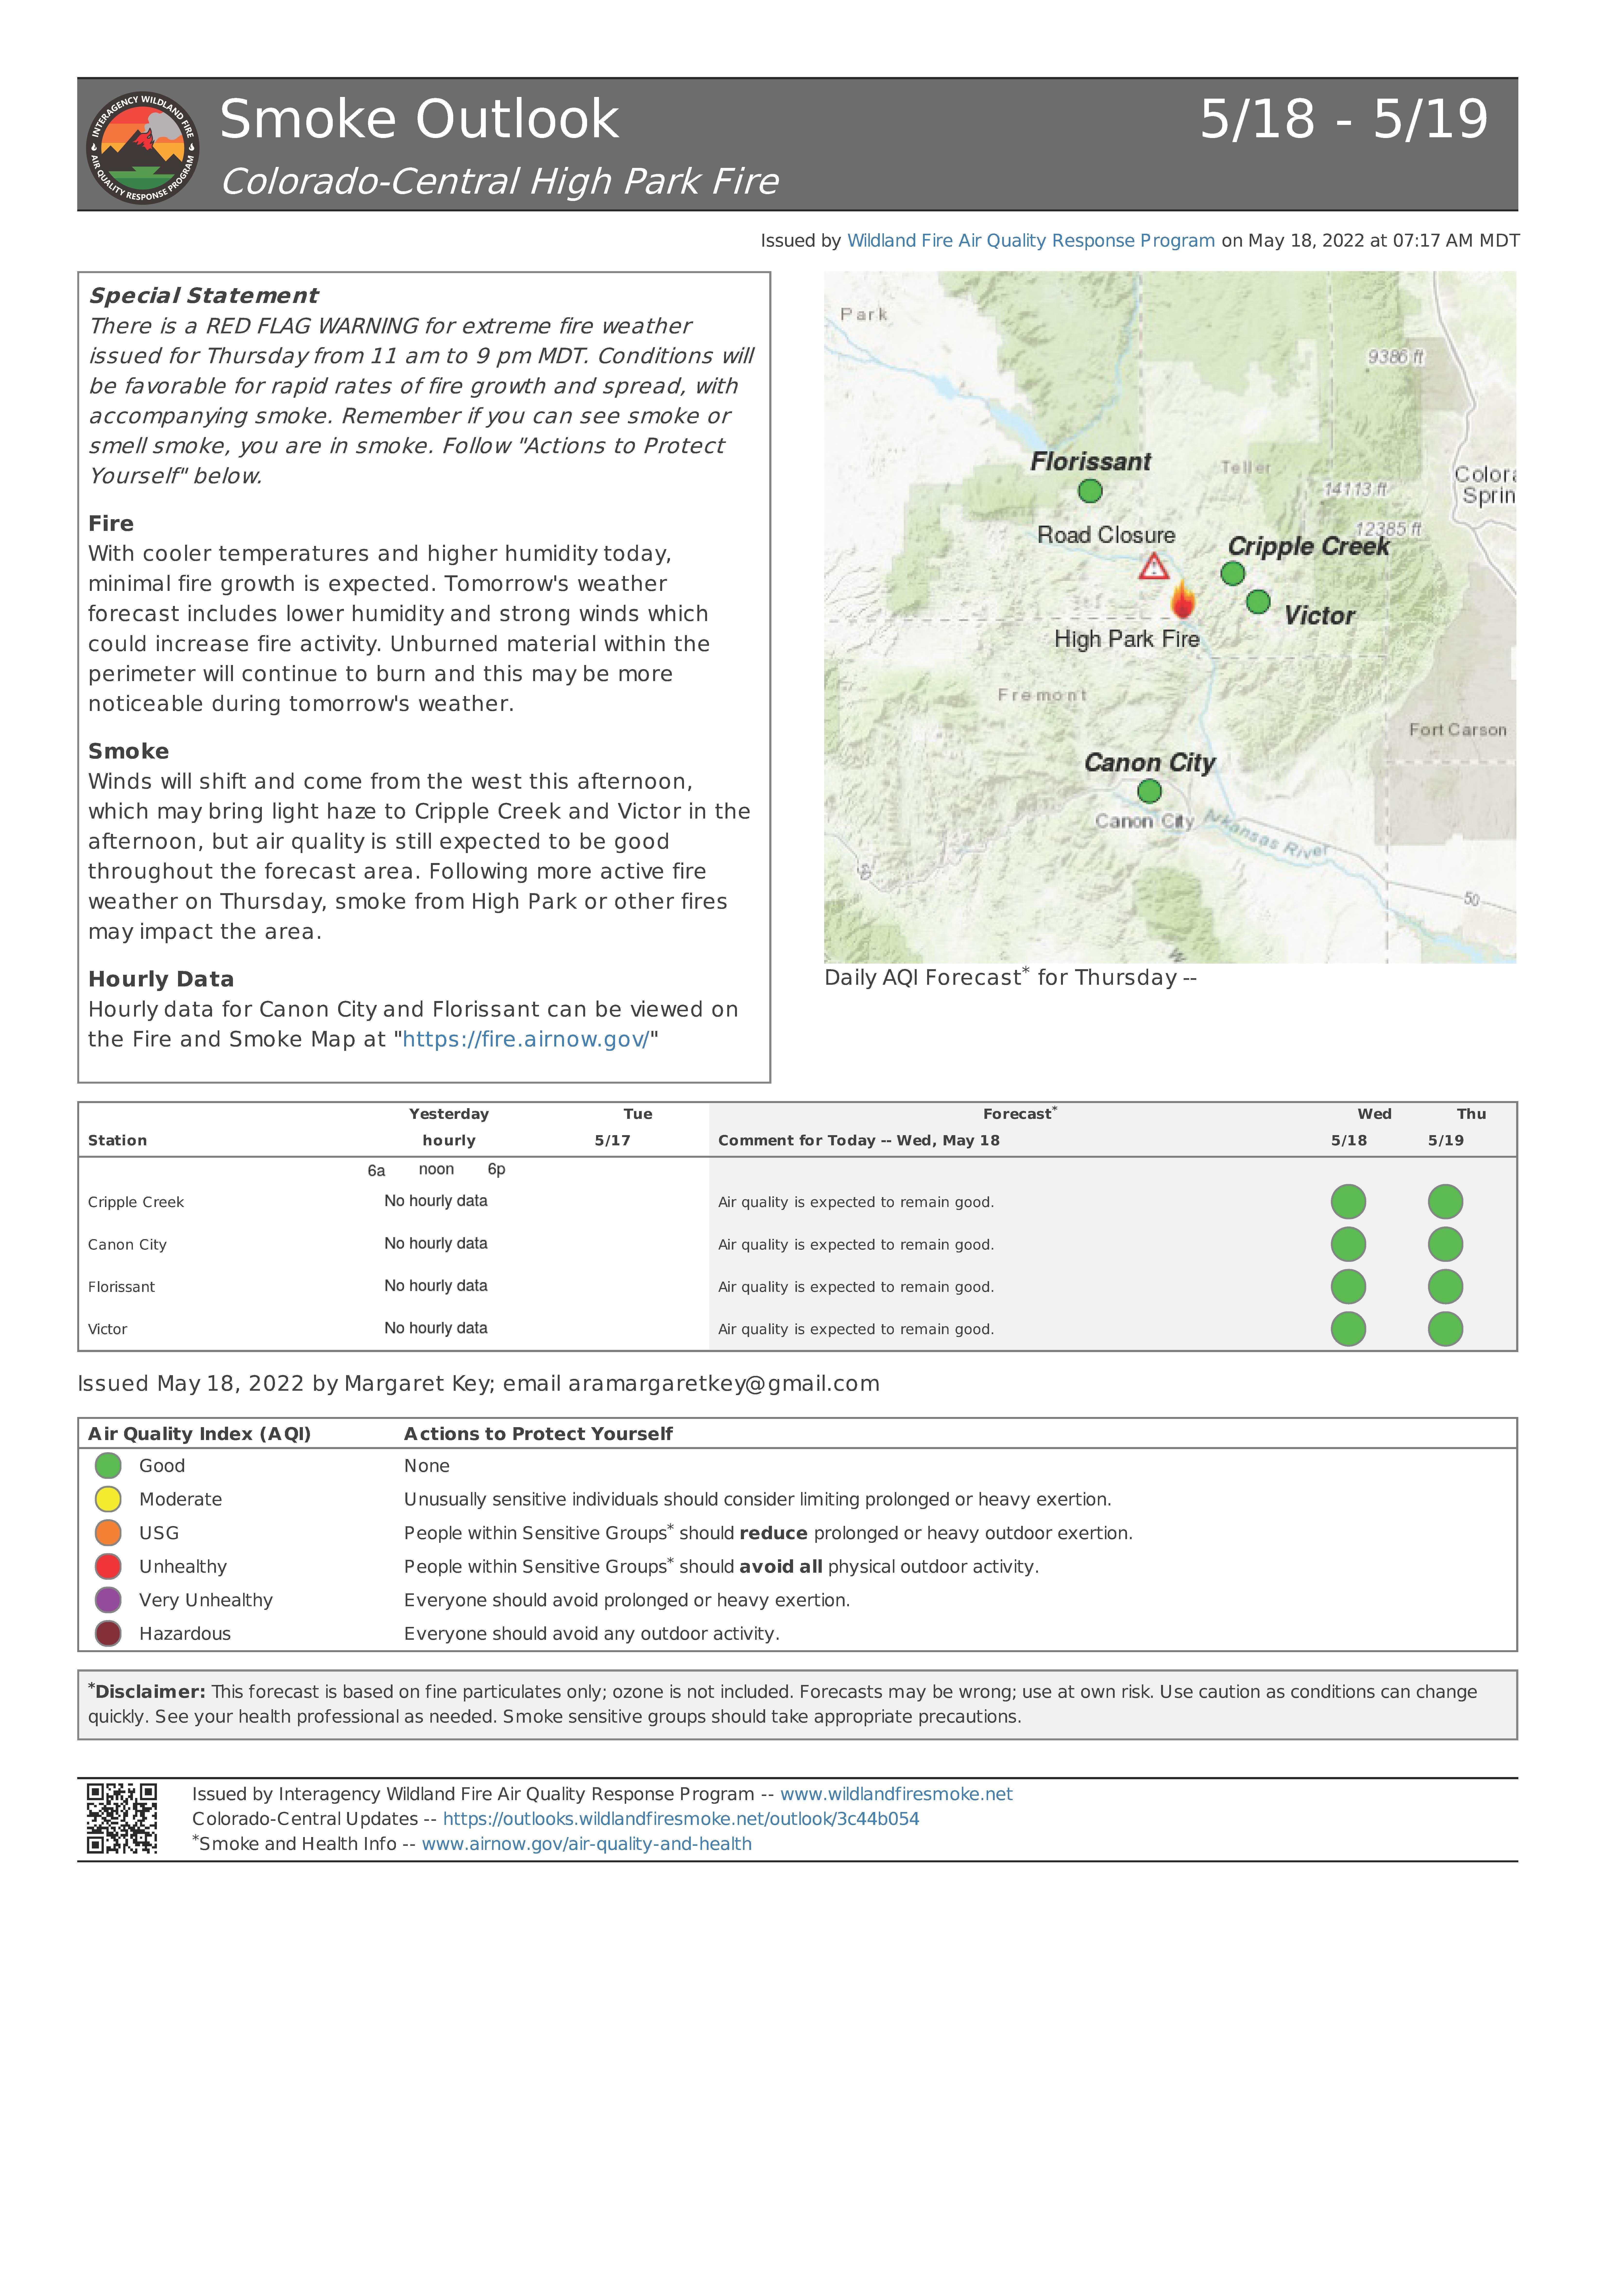 Smoke Outlook, Cripple Creek, Canon City, Florissant, and Victor are all rated as Good.